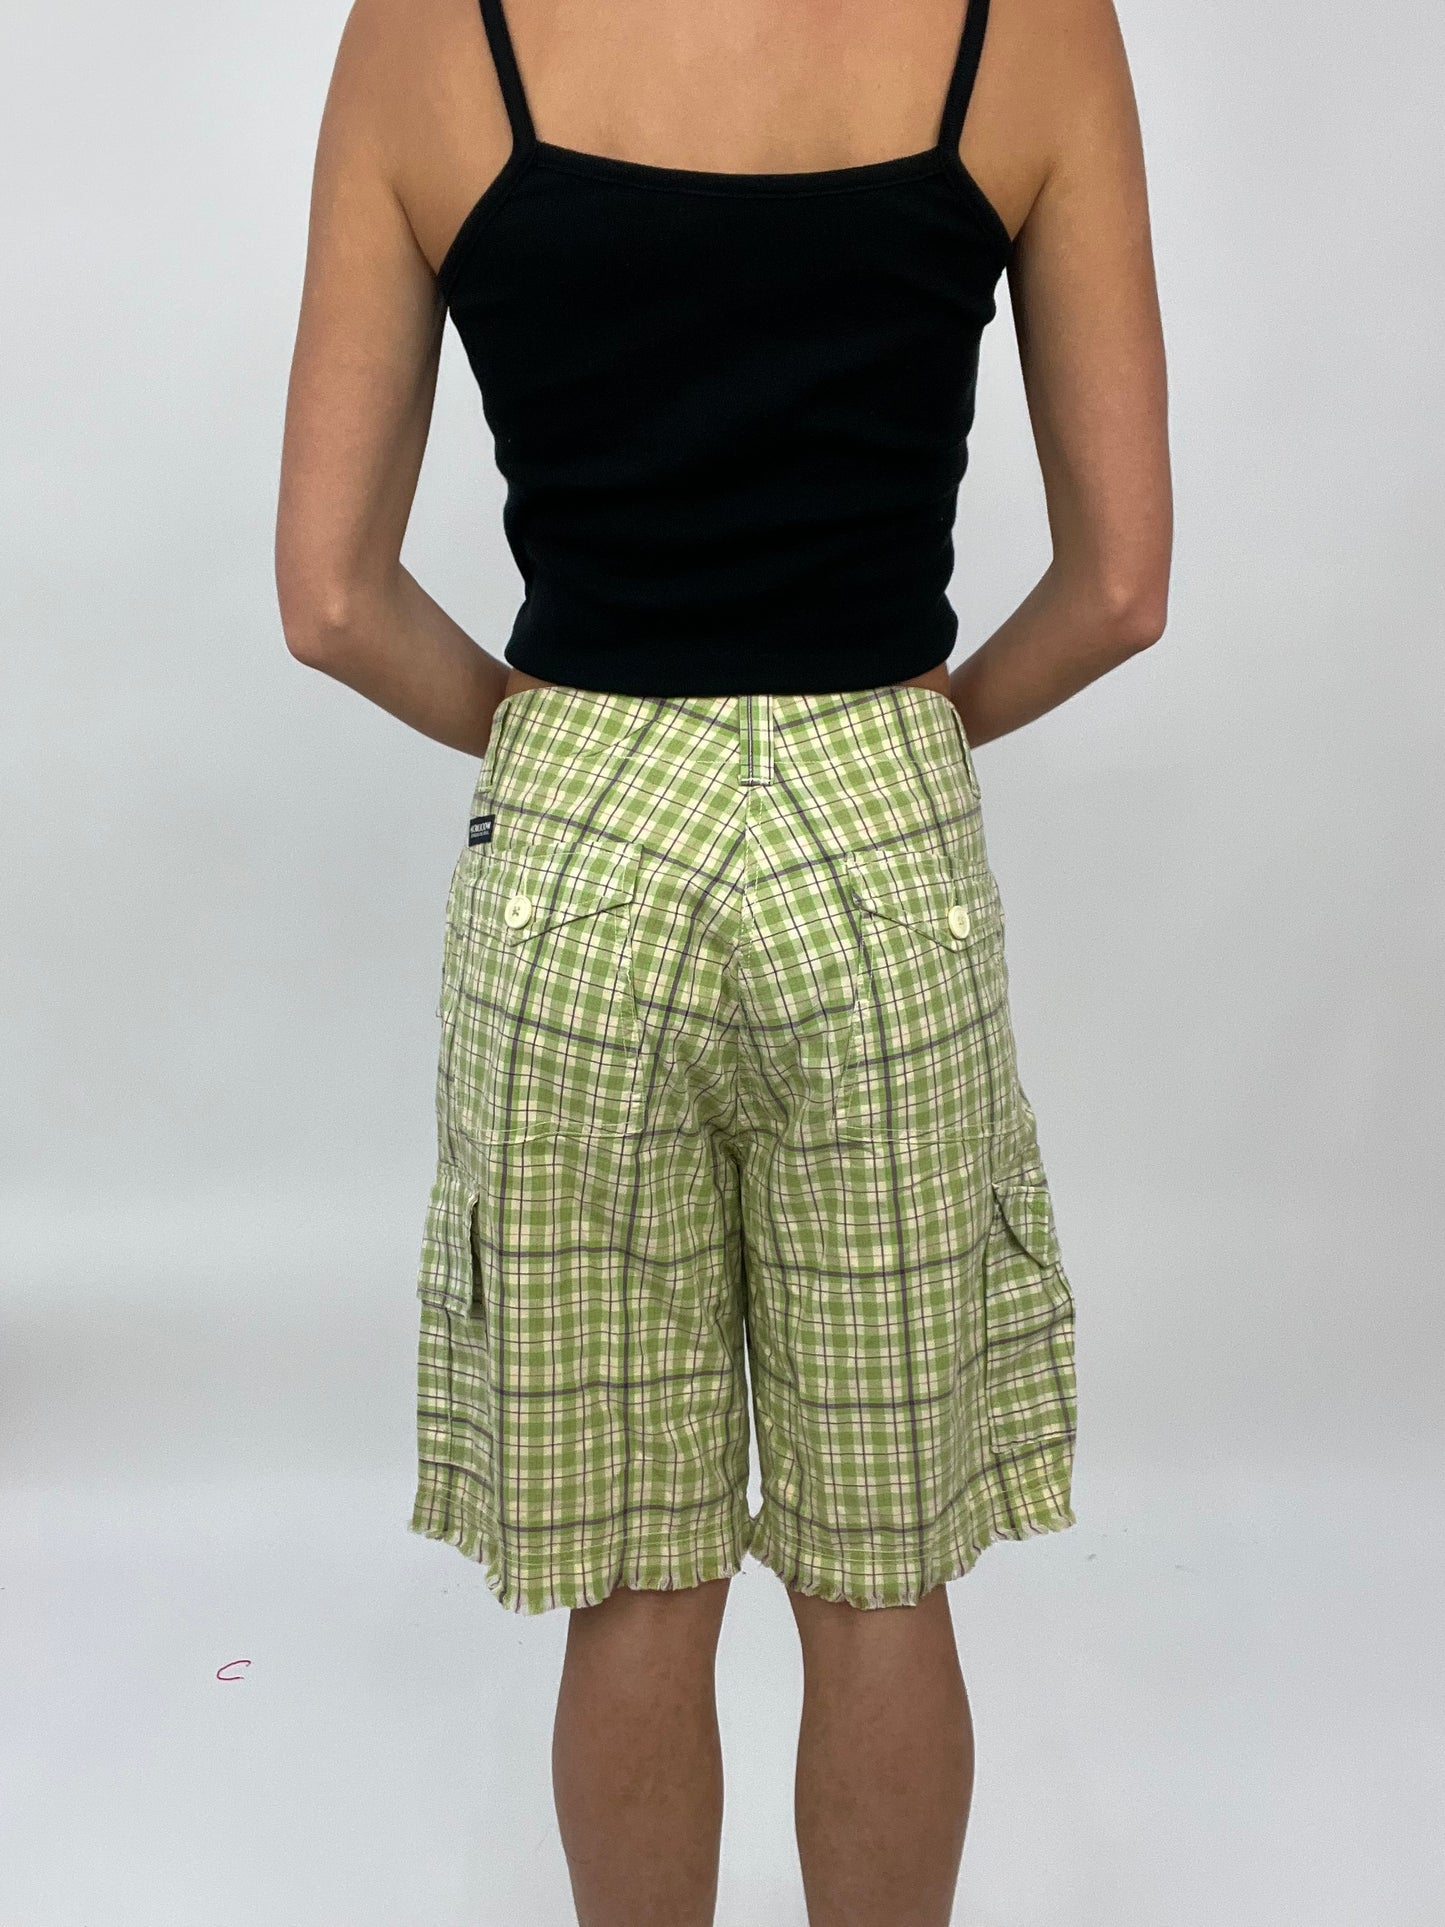 COCONUT GIRL DROP | large green and white checkered gingham jorts